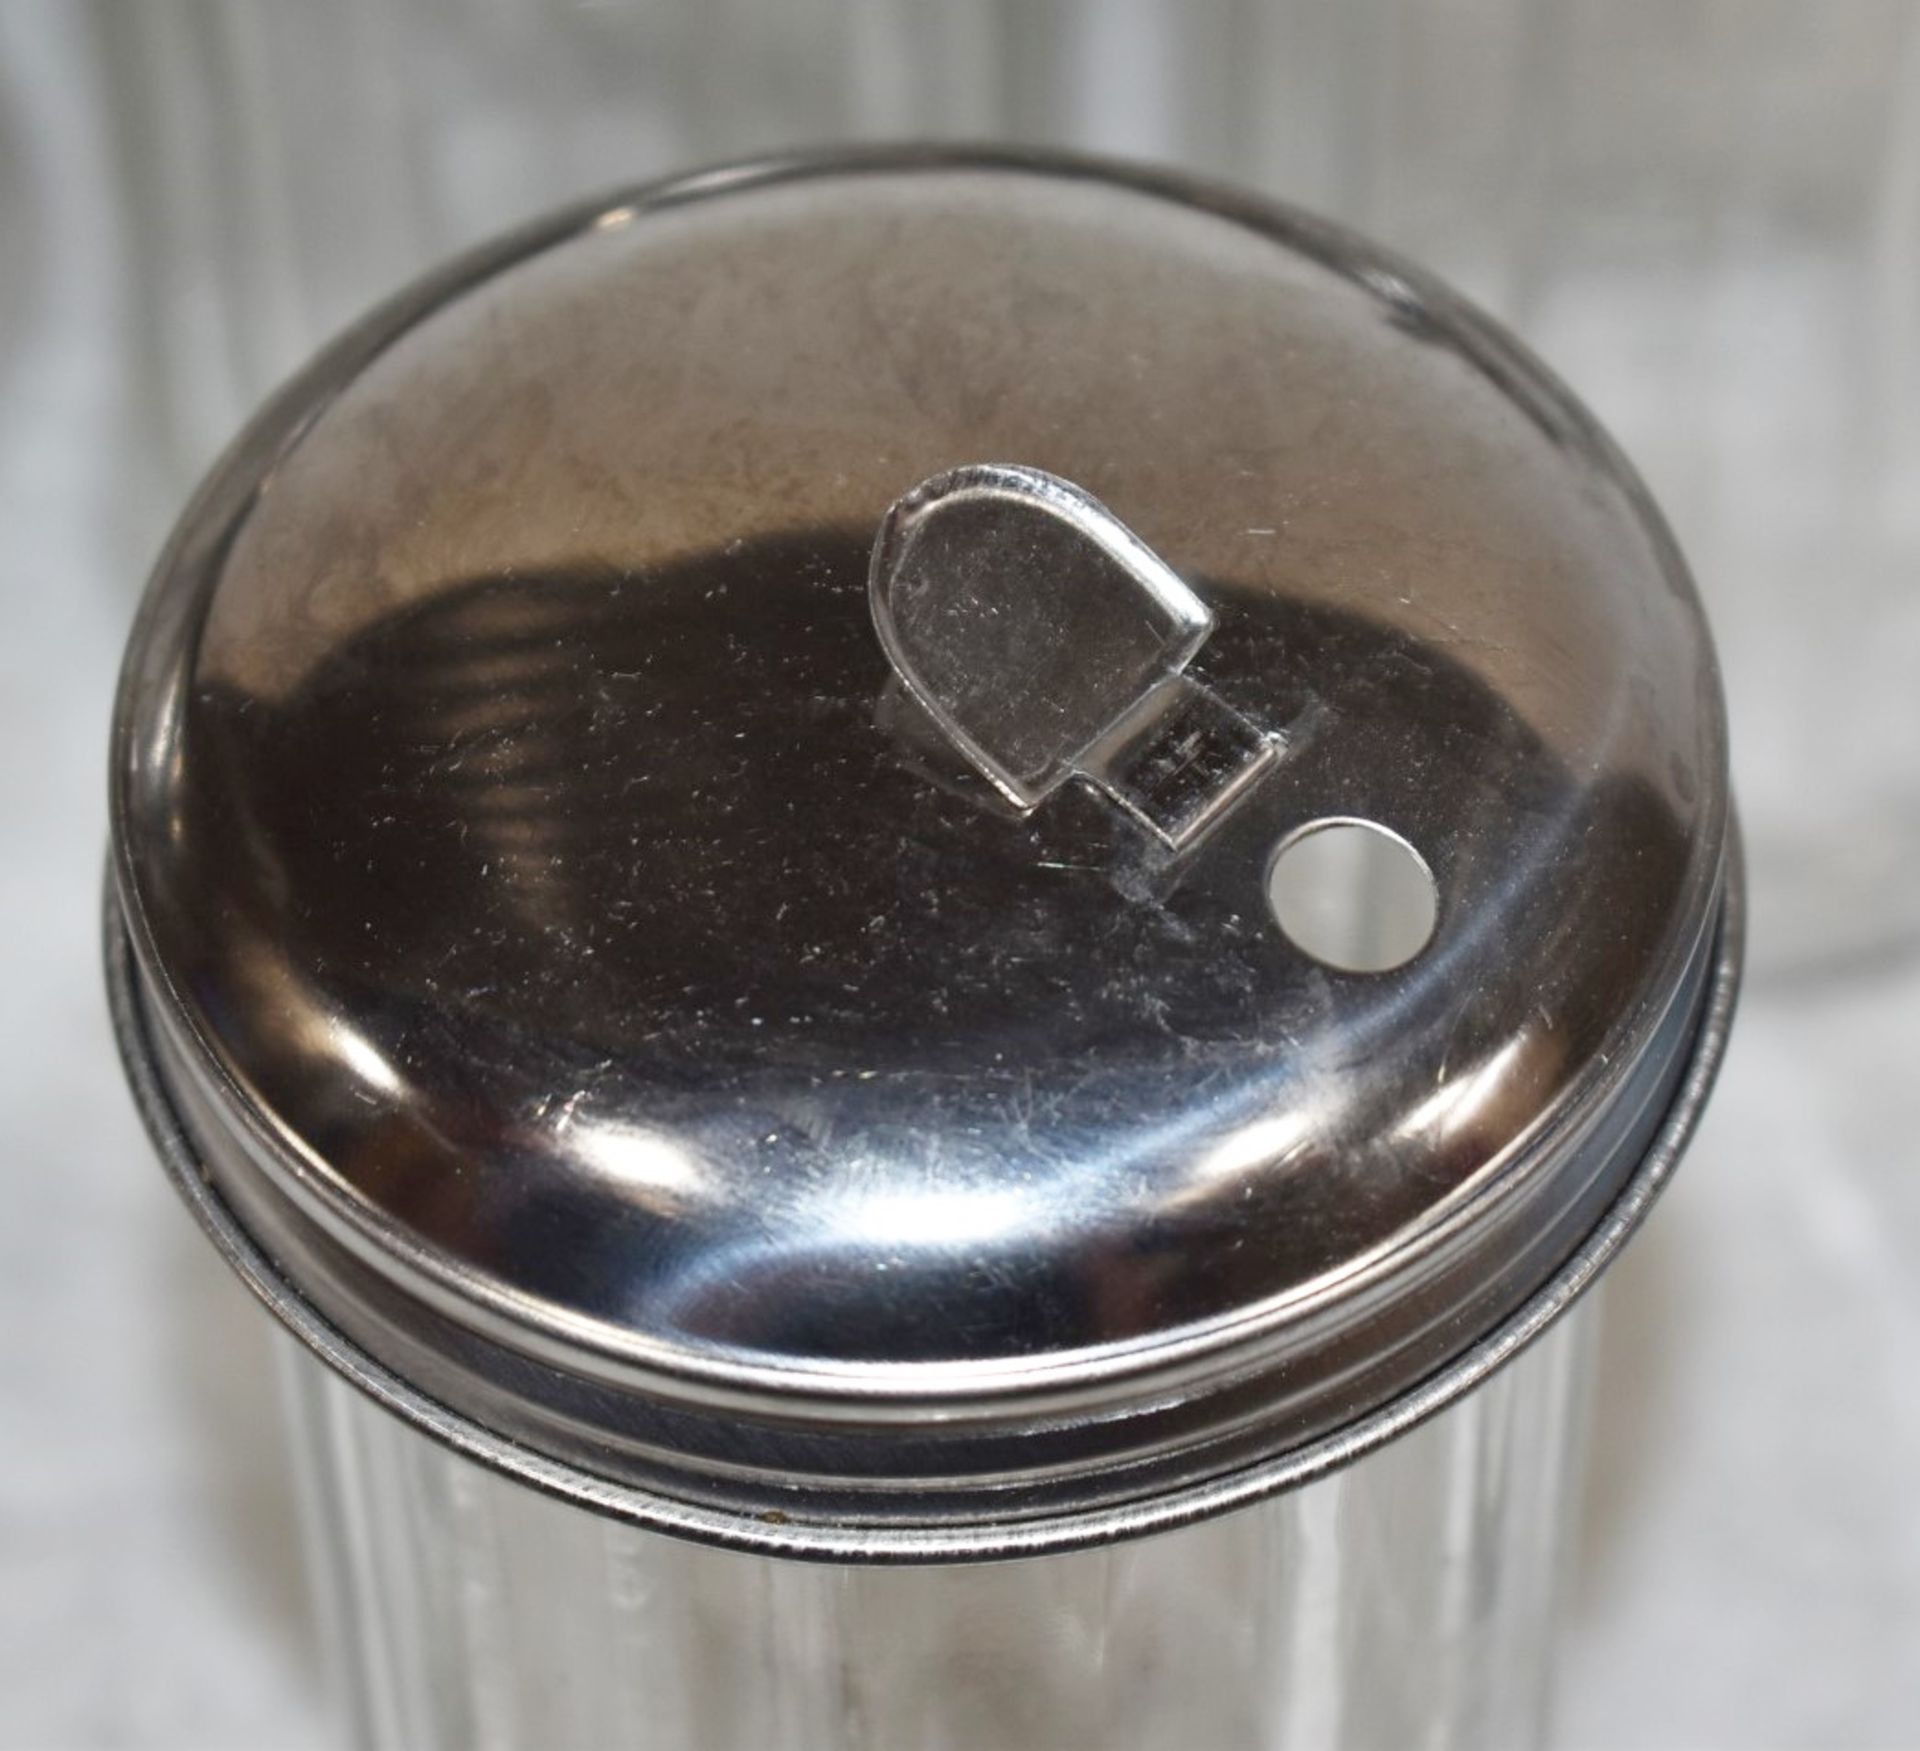 14 x Glass Sugar Dispensing Pots With Stainless Steel Lids - Suitable For Cafes or Restaurants - Image 5 of 8